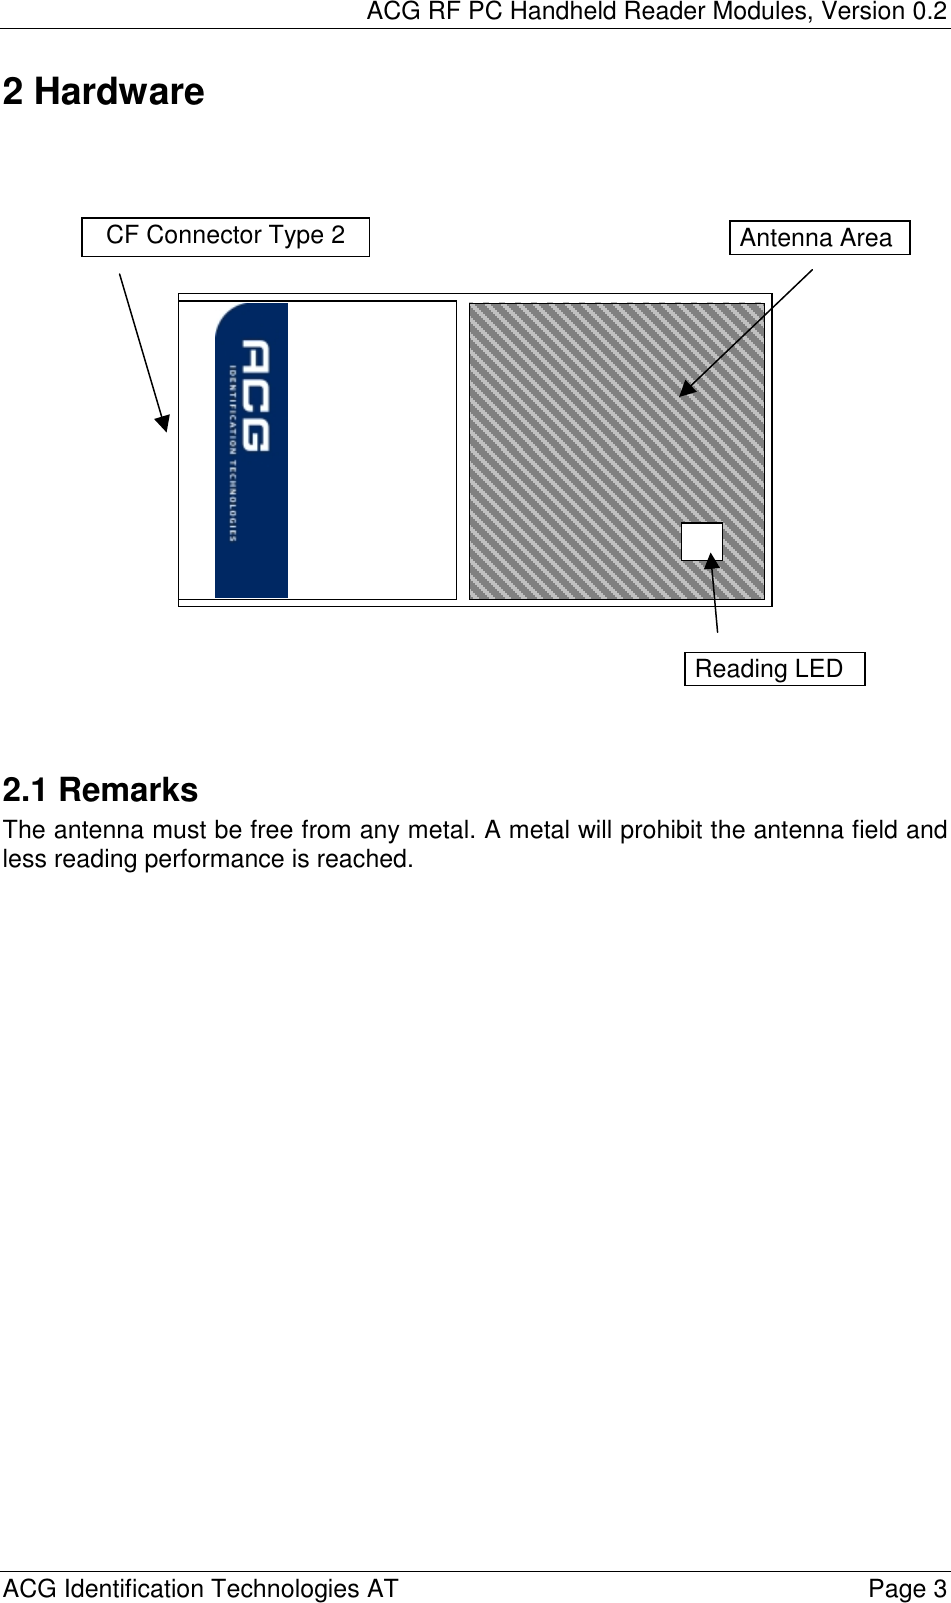 ACG RF PC Handheld Reader Modules, Version 0.2  ACG Identification Technologies AT    Page 3 2 Hardware                       2.1 Remarks The antenna must be free from any metal. A metal will prohibit the antenna field and less reading performance is reached.  Reading LED CF Connector Type 2 Antenna Area